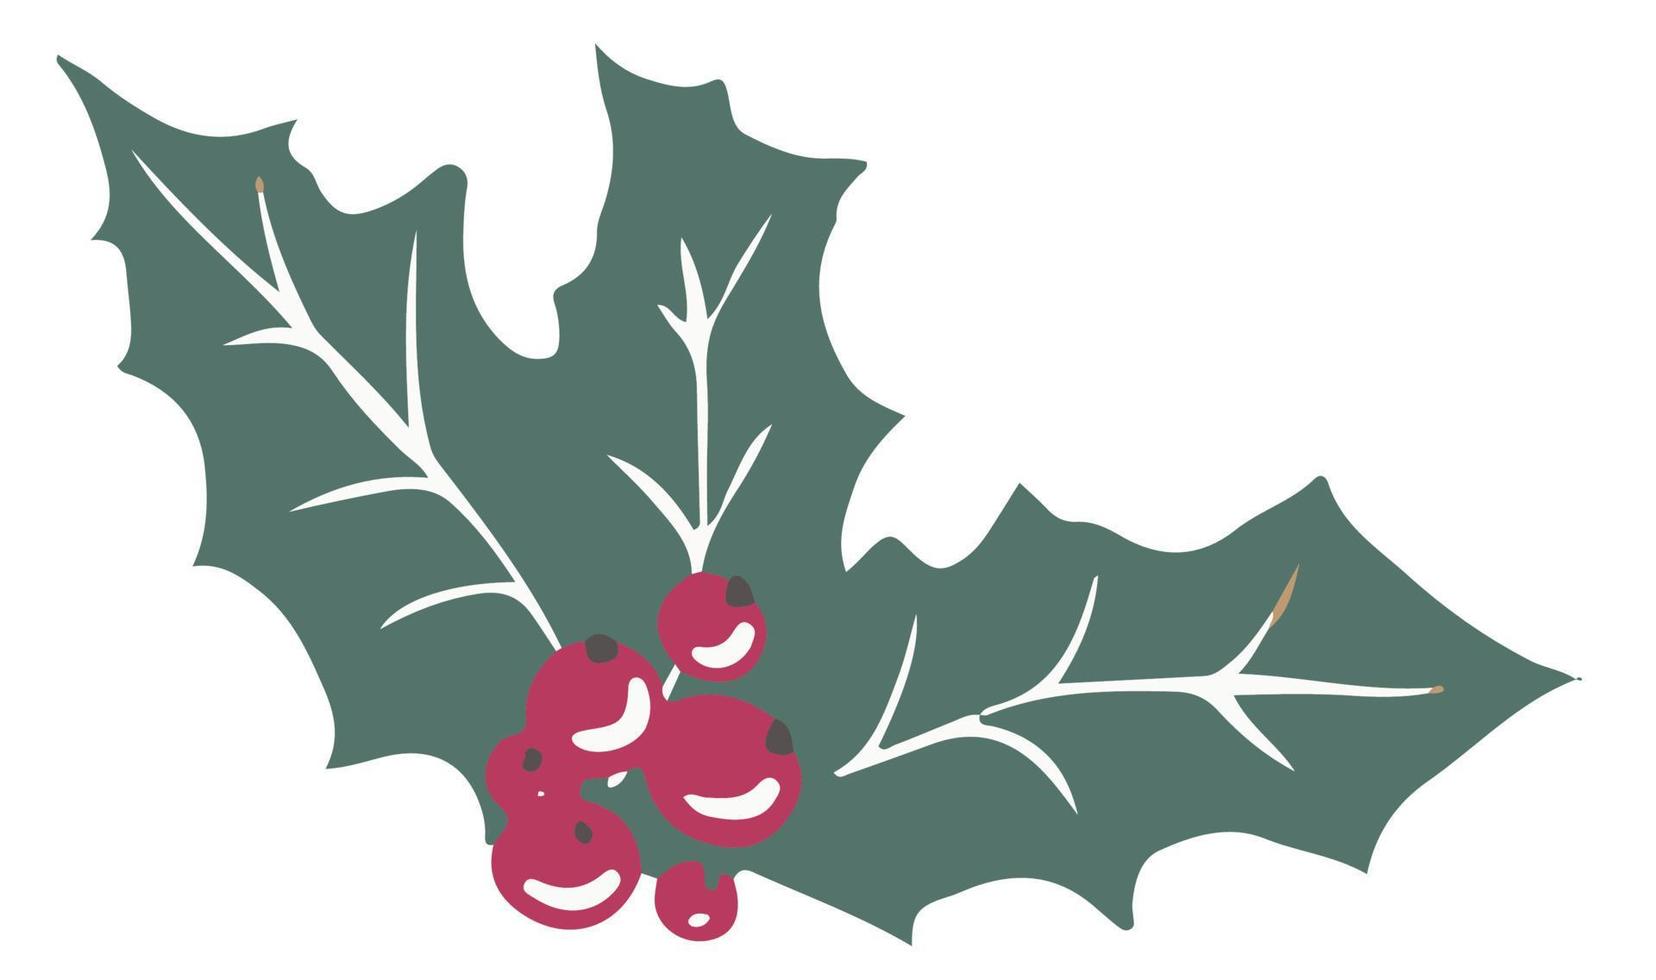 Mistletoe plant with berries and evergreen foliage vector